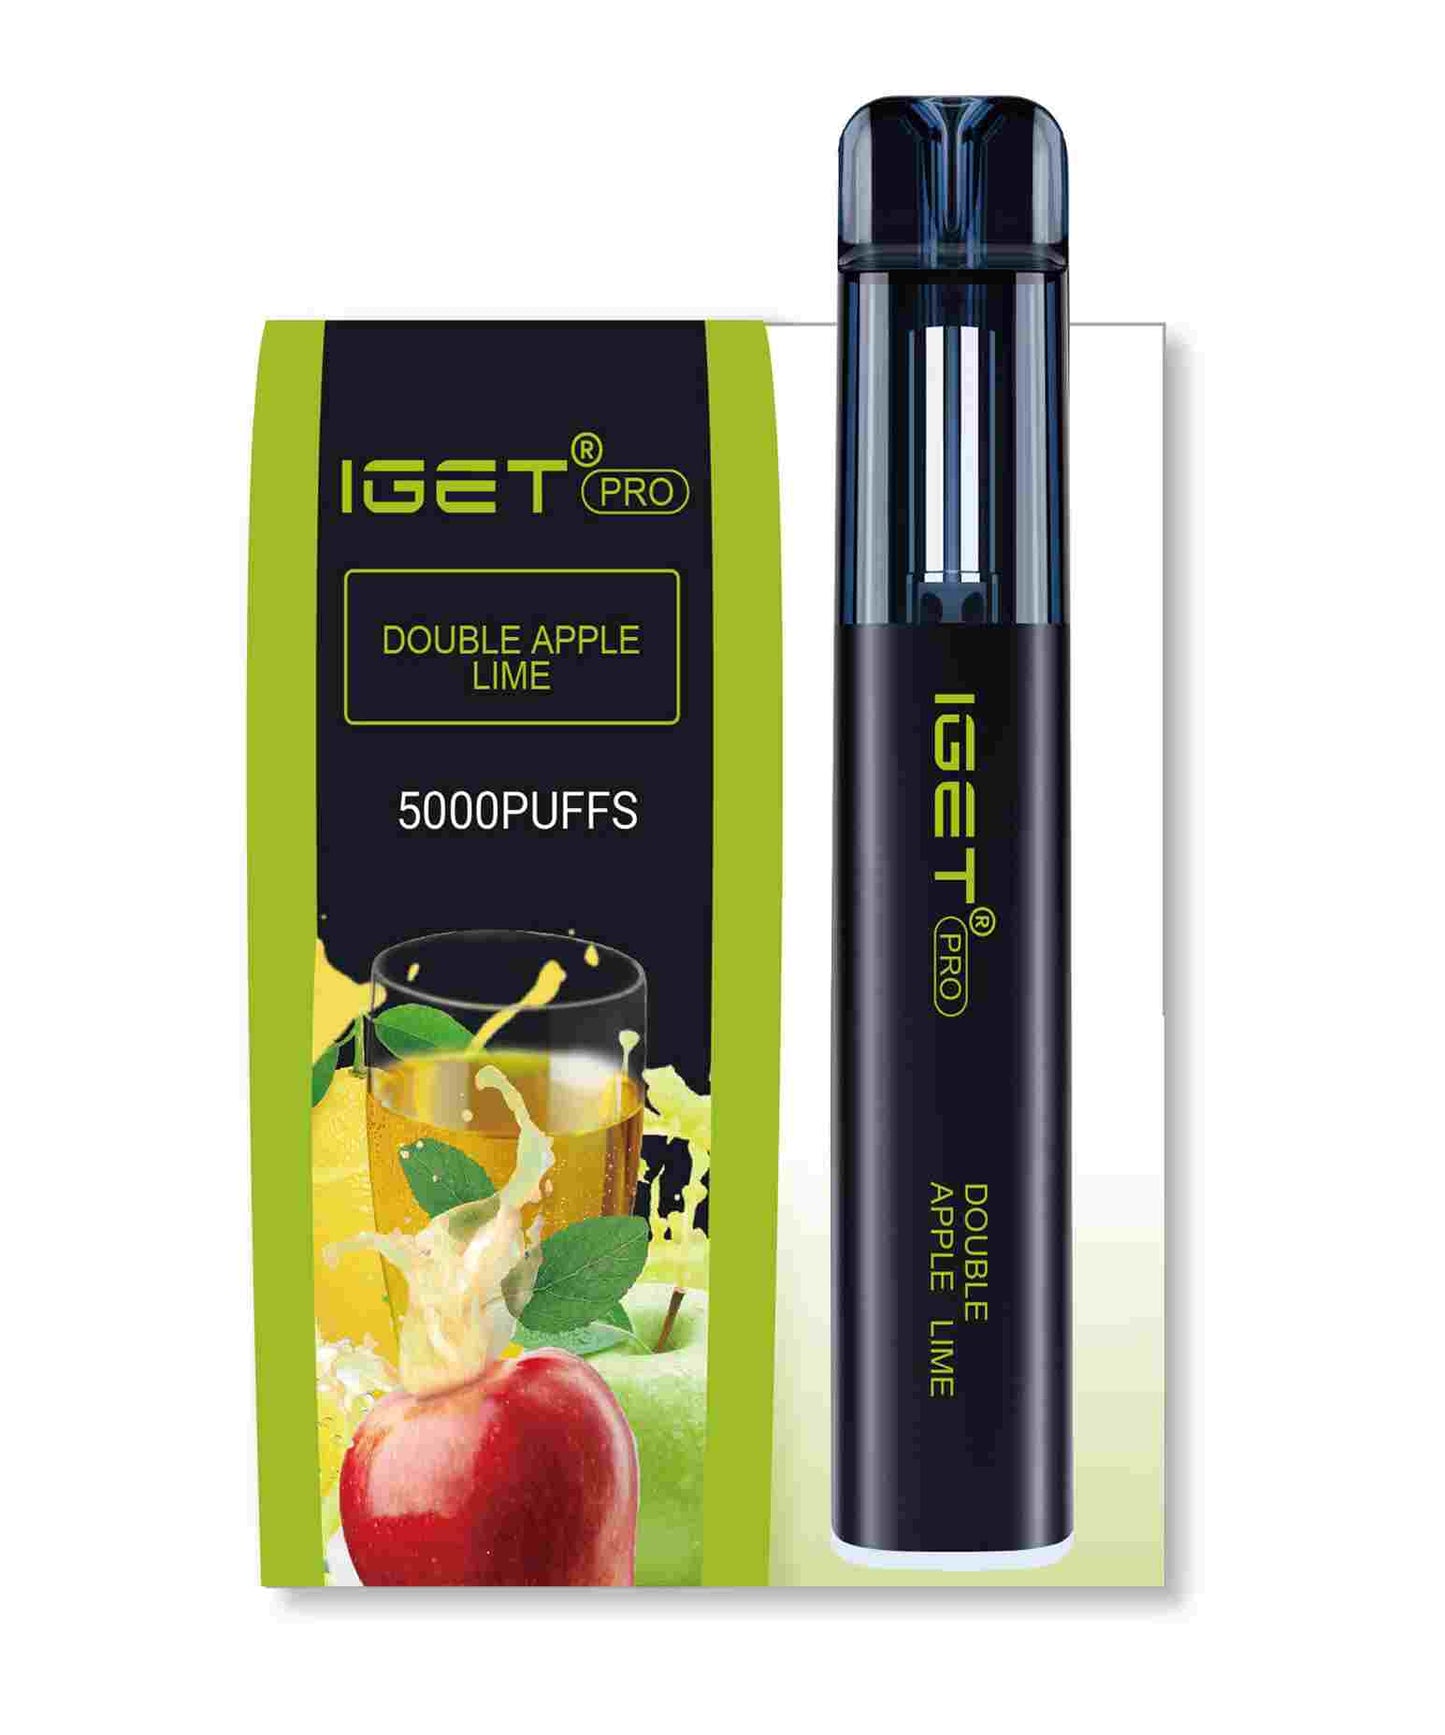 Double Apple Lime IGET Pro – 5000